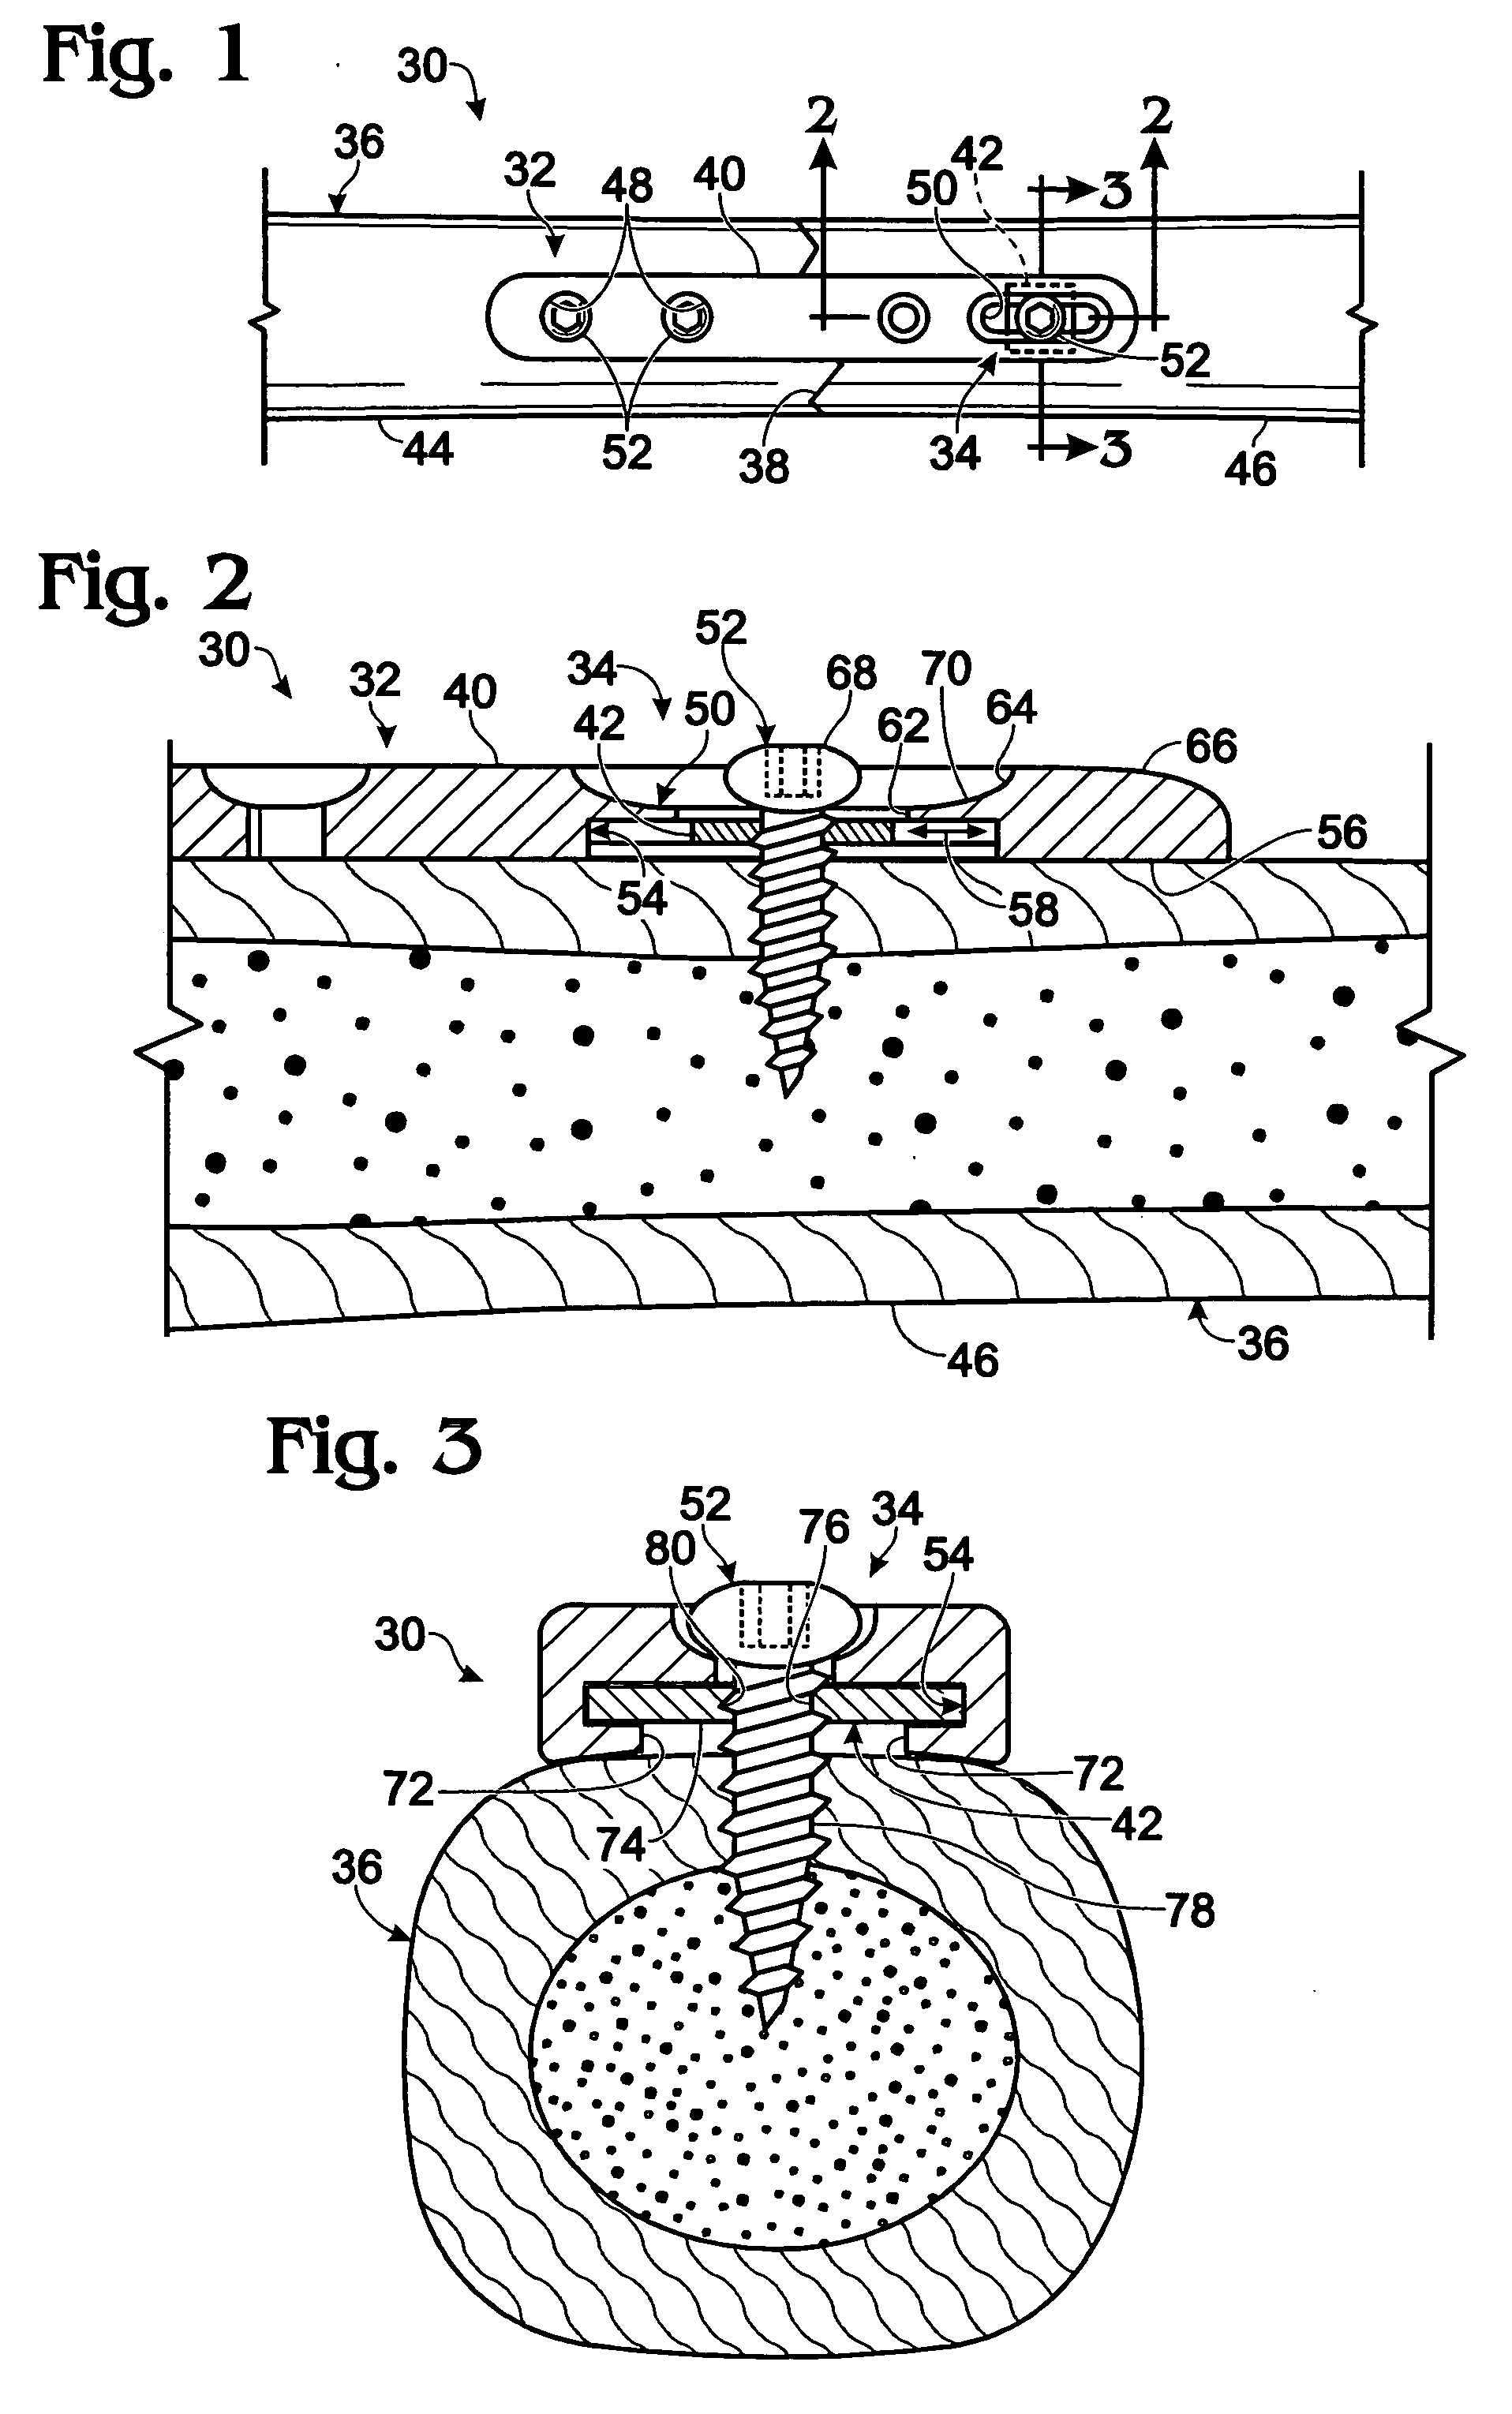 Bone plates with movable locking elements